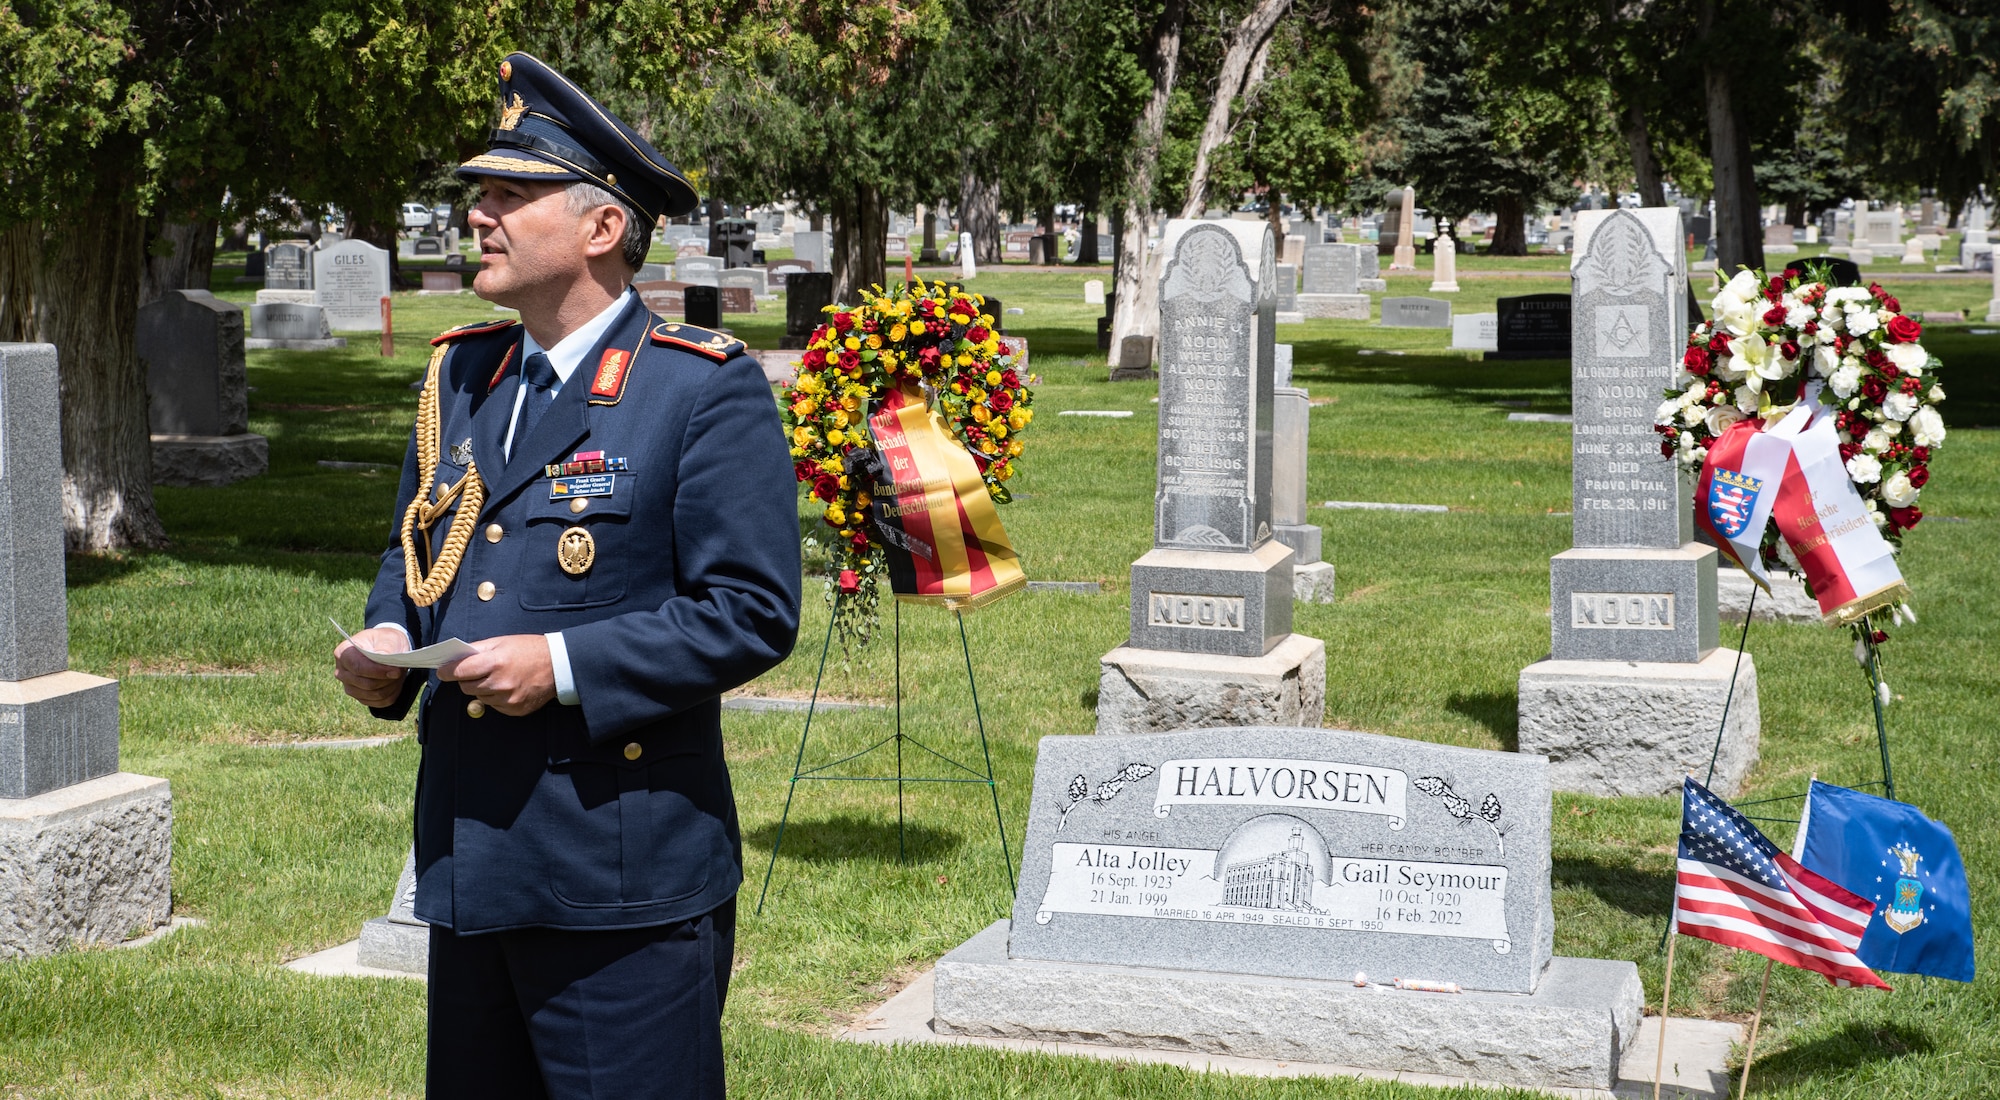 Brig. Gen. Frank Gräfe, the defense attaché from the Federation of Germany to the United States, speaks about Gail and his service to not only America, but to Germany as well on May 20th at the Provo City Cemetary.